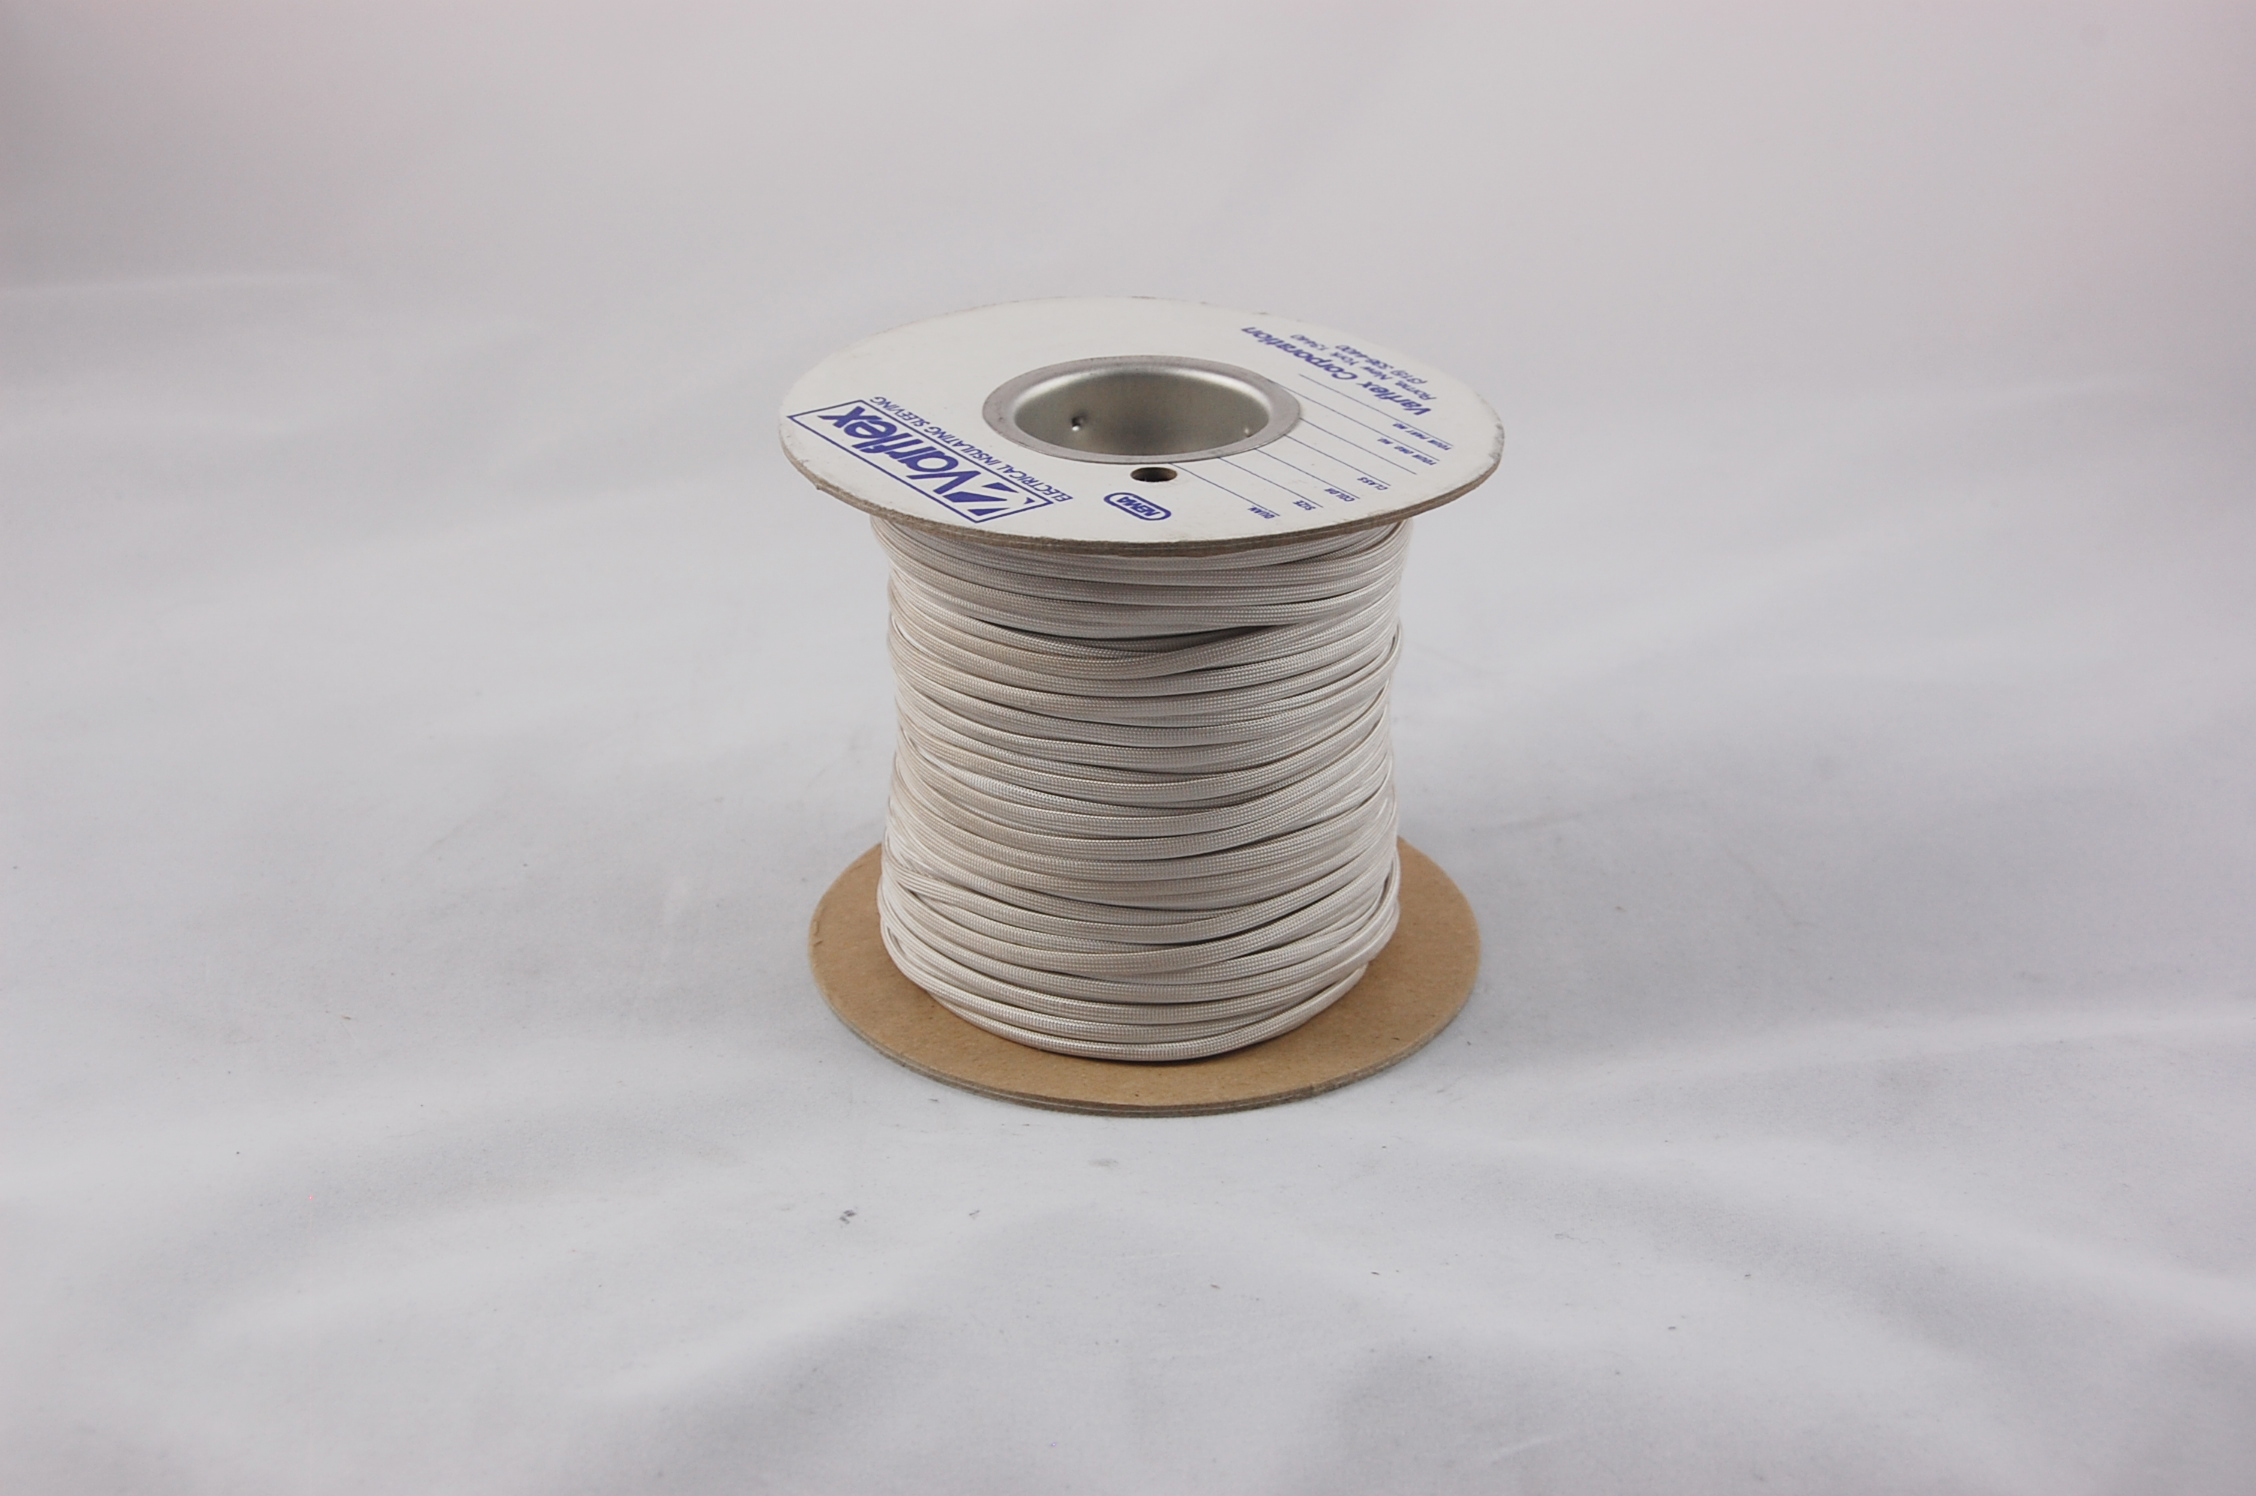 5/8" AWG Varglas Type H Heat-Cleaned High Temperature Non-Fray Flexible Fiberglass Sleeving , natural, 100 FT per spool